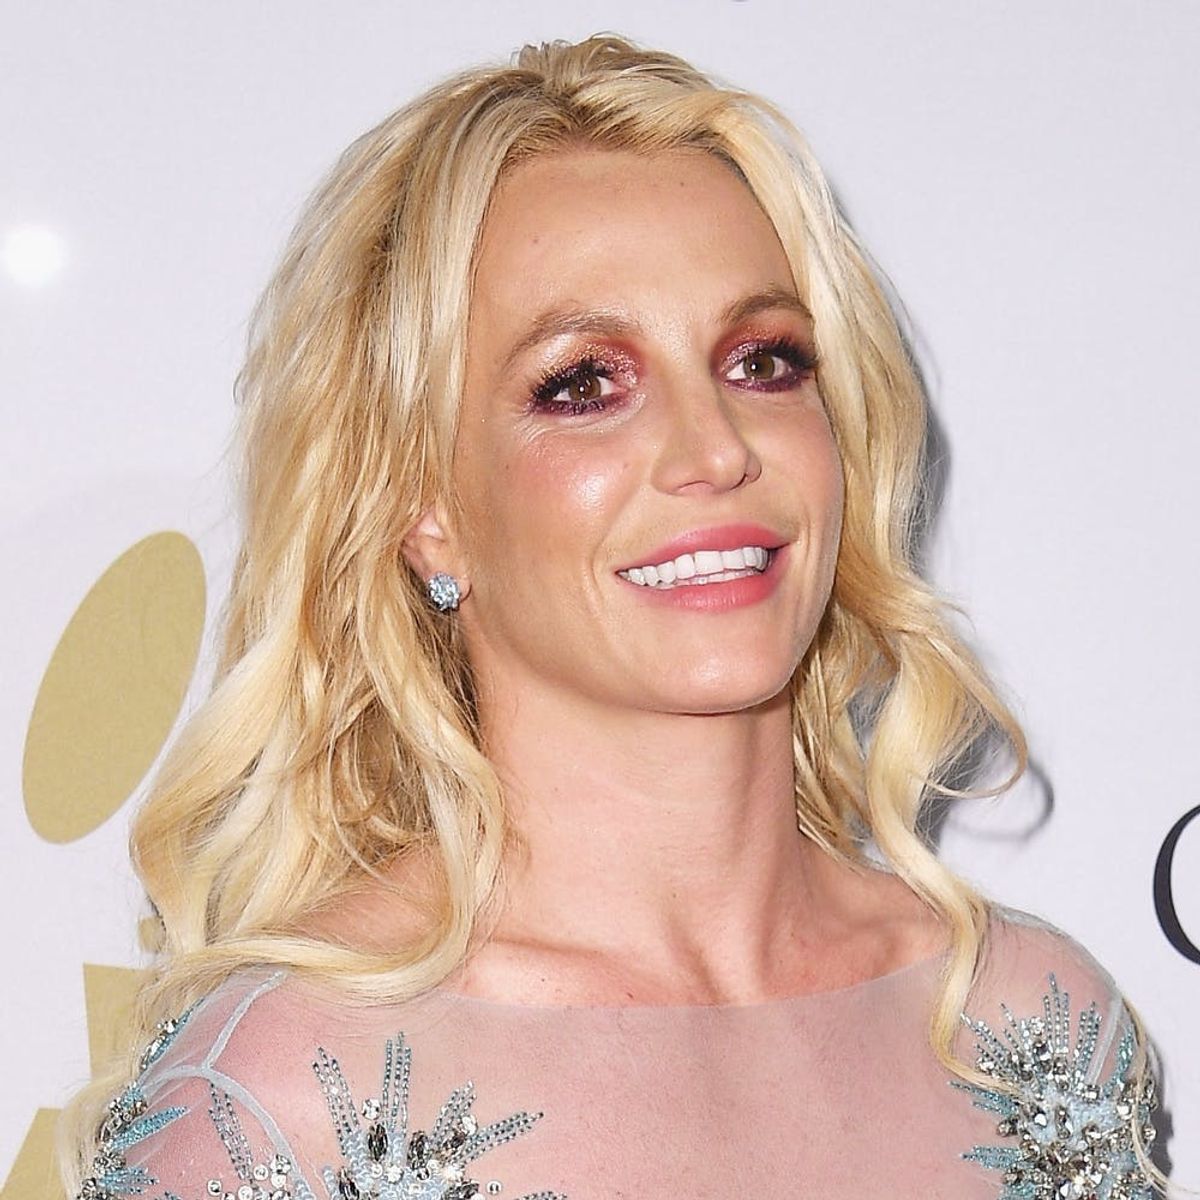 Britney Spears Just Recreated Her Iconic Schoolgirl Look from “… Baby One More Time”